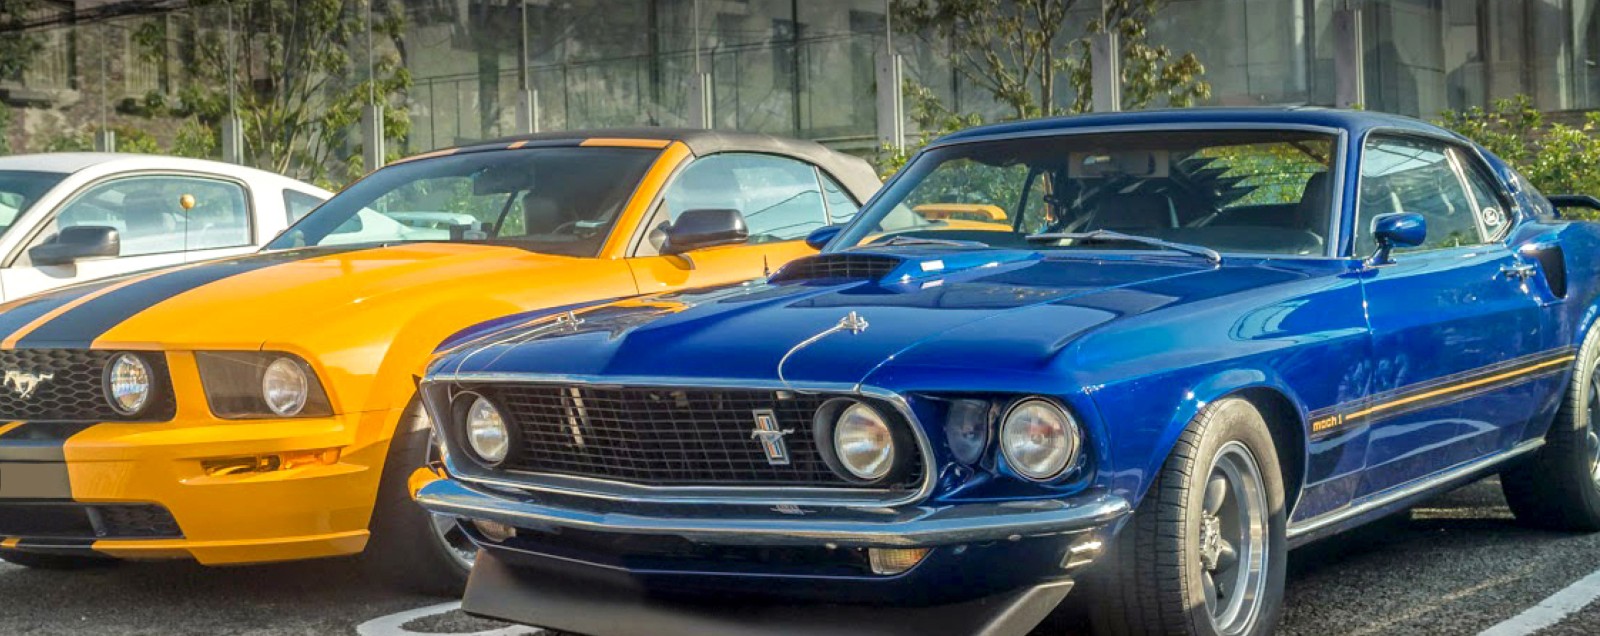 Ford Mustang_cars&coffee_16-9_site.jpg